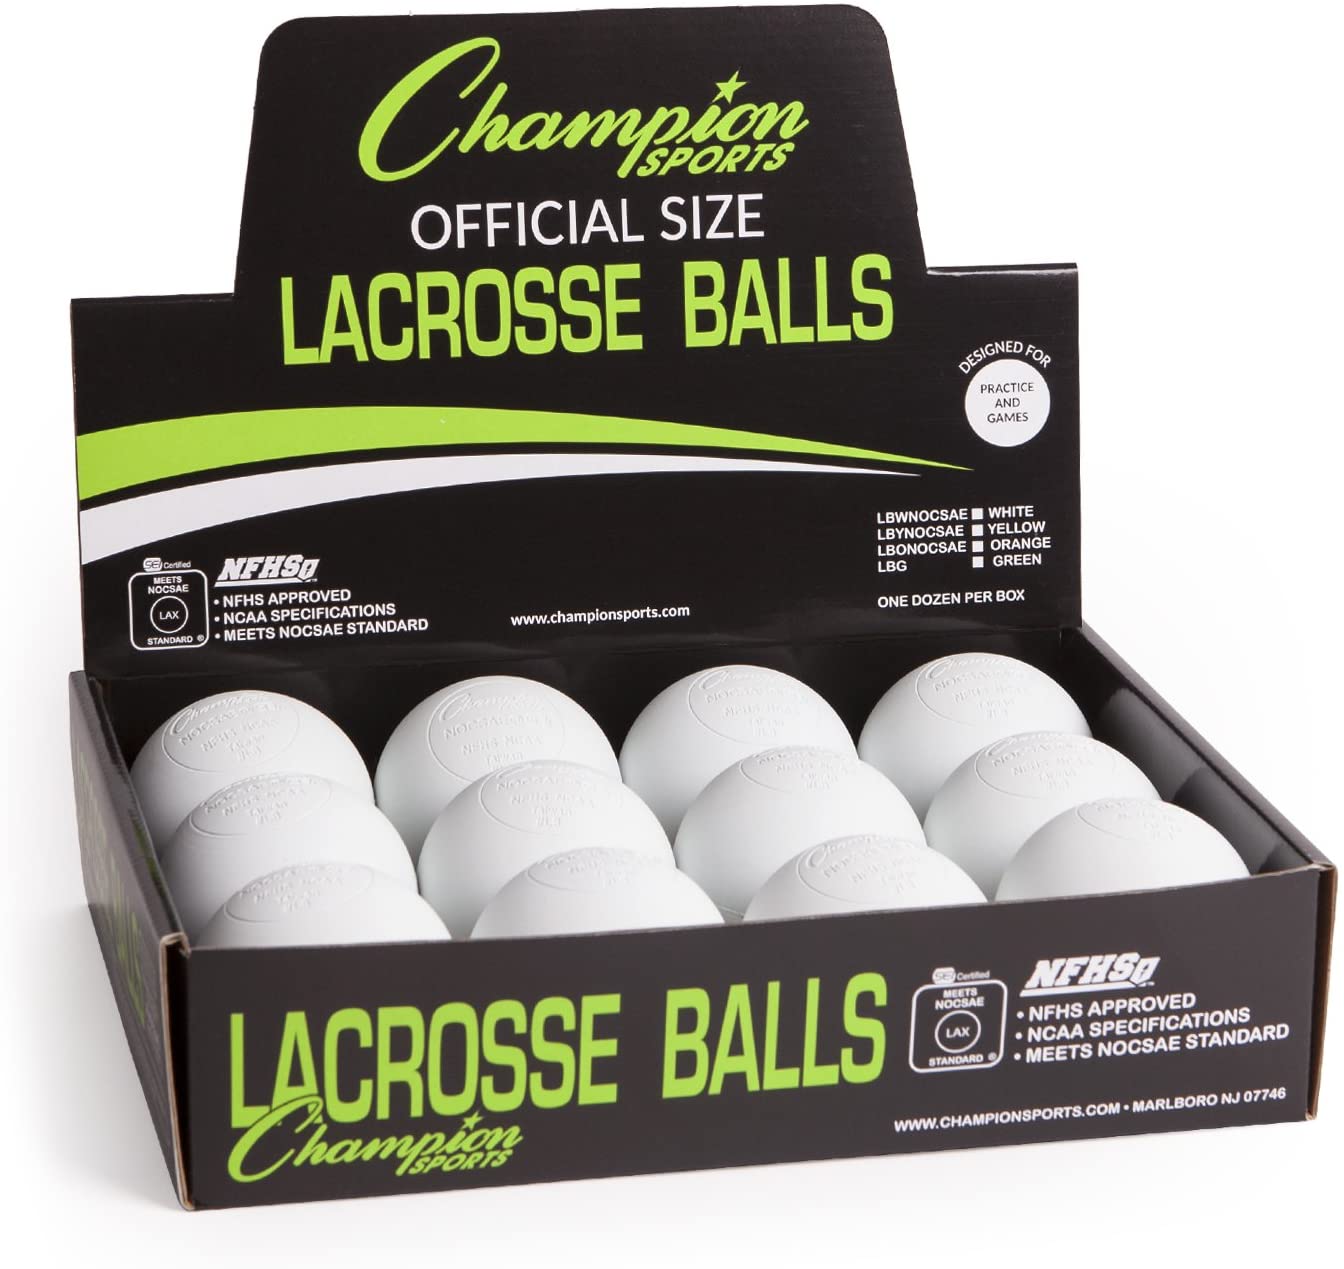 6 2 Champion Sports Official Lacrosse Balls 3 and 12 Multiple Colors in Packs of 1